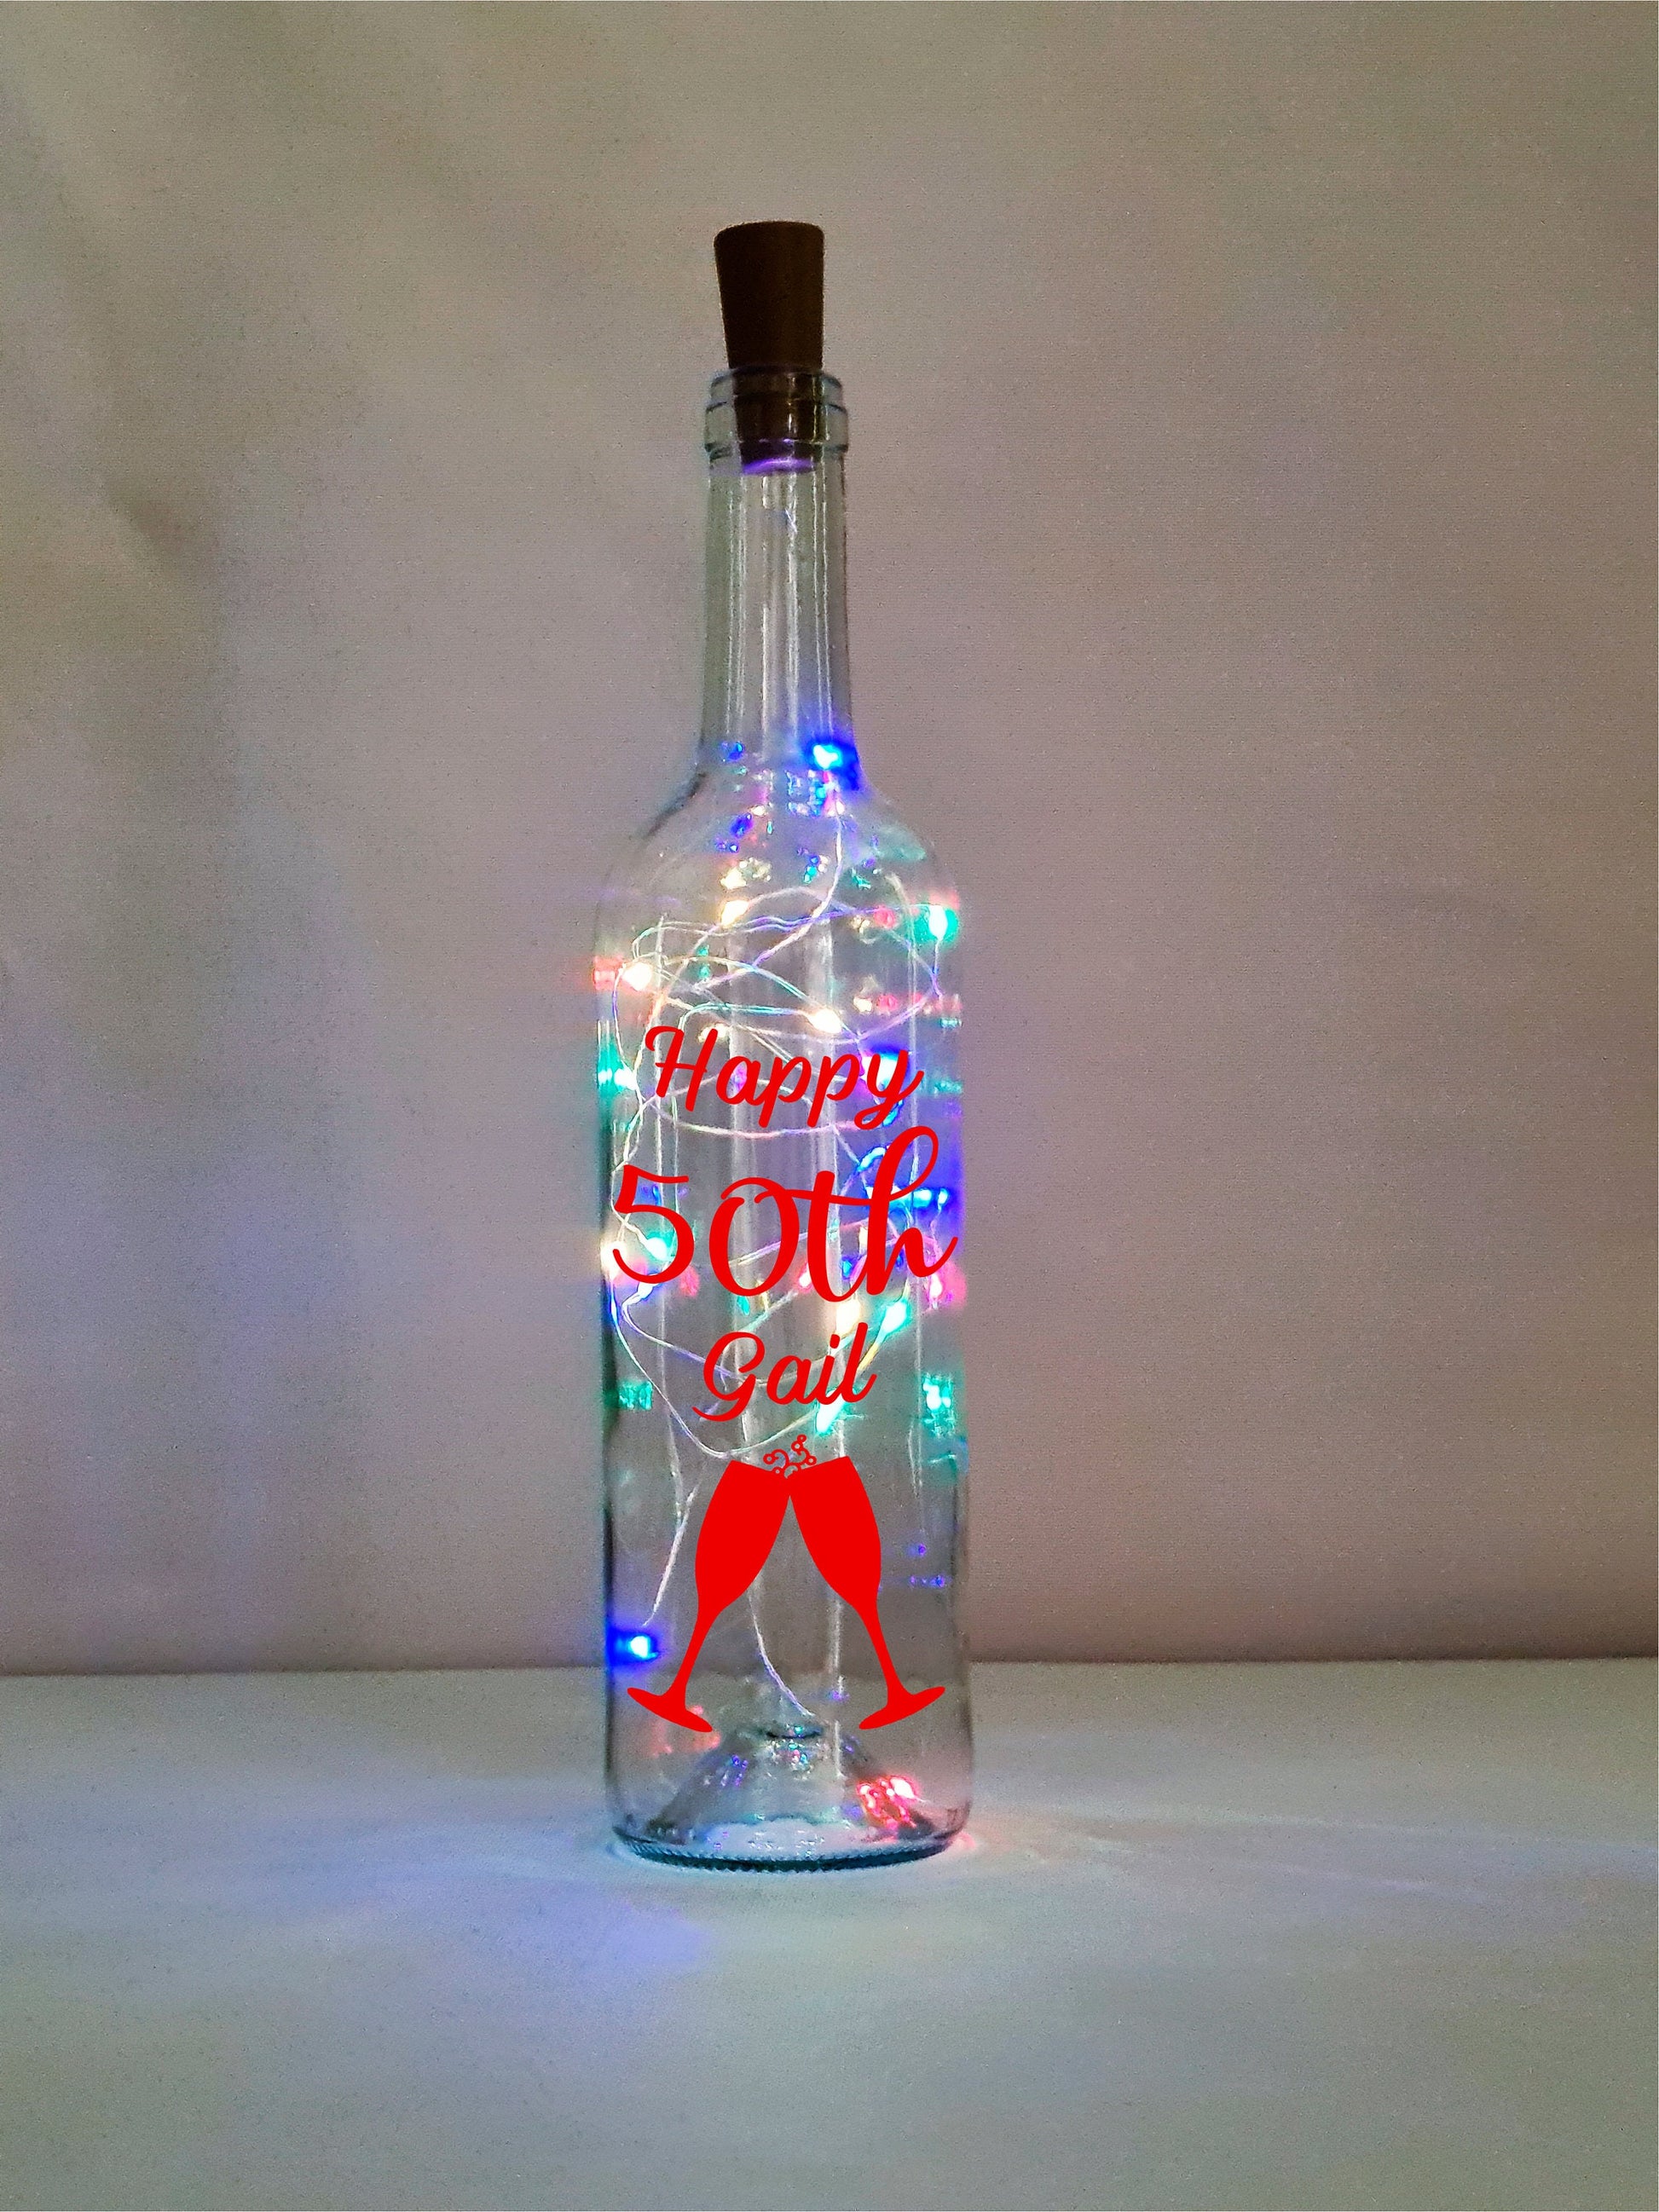 Personalised 50th Champagne Birthday Gift, Light Up Wine Bottle, Gift For Her, Gift For Him, Sister Present, Daughter, White, Pink, Blue